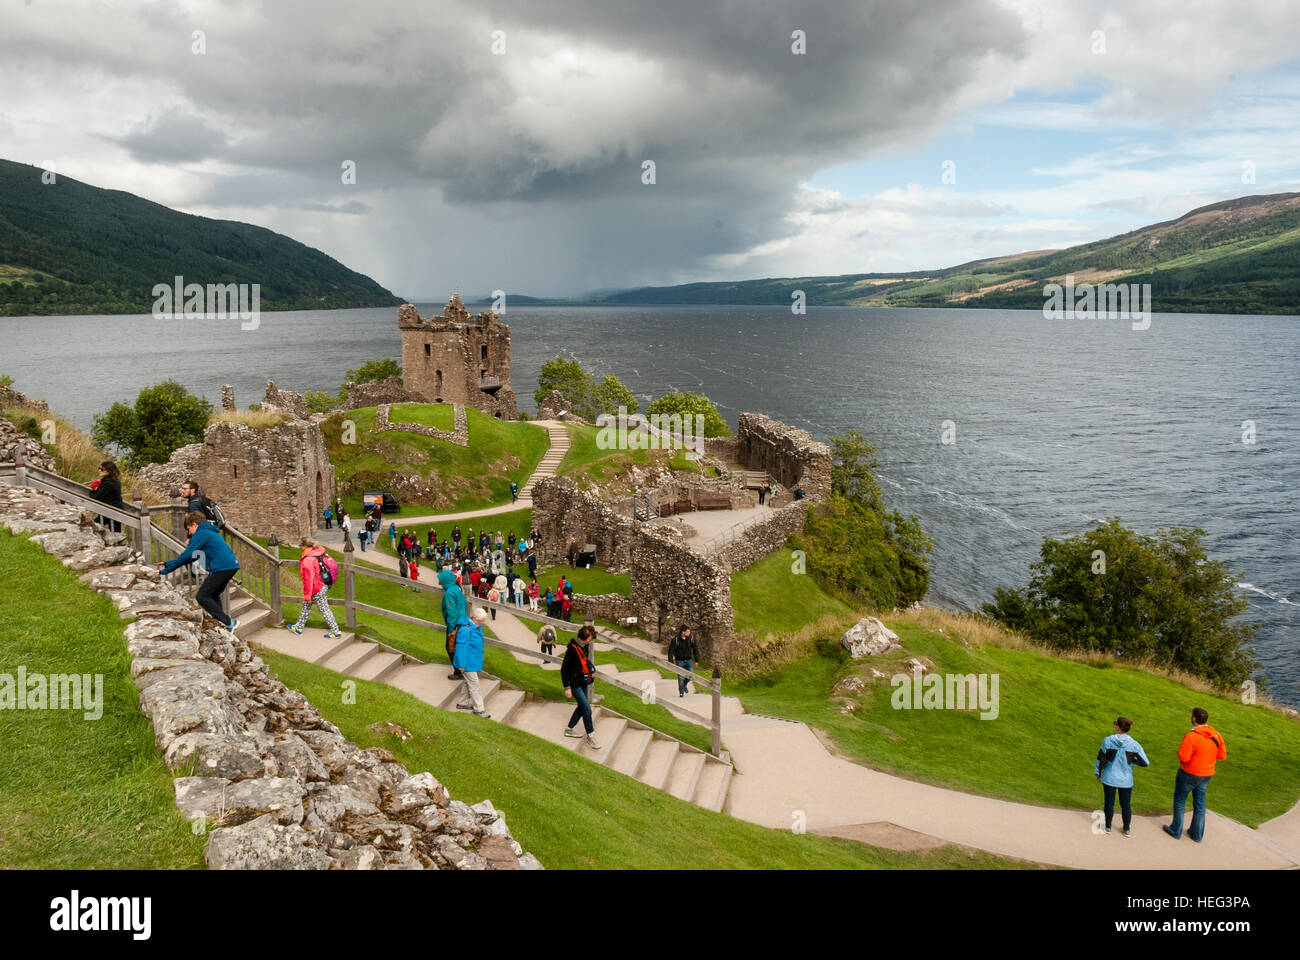 Crowds at Urquhart Castle on Loch Ness Scotland Stock Photo